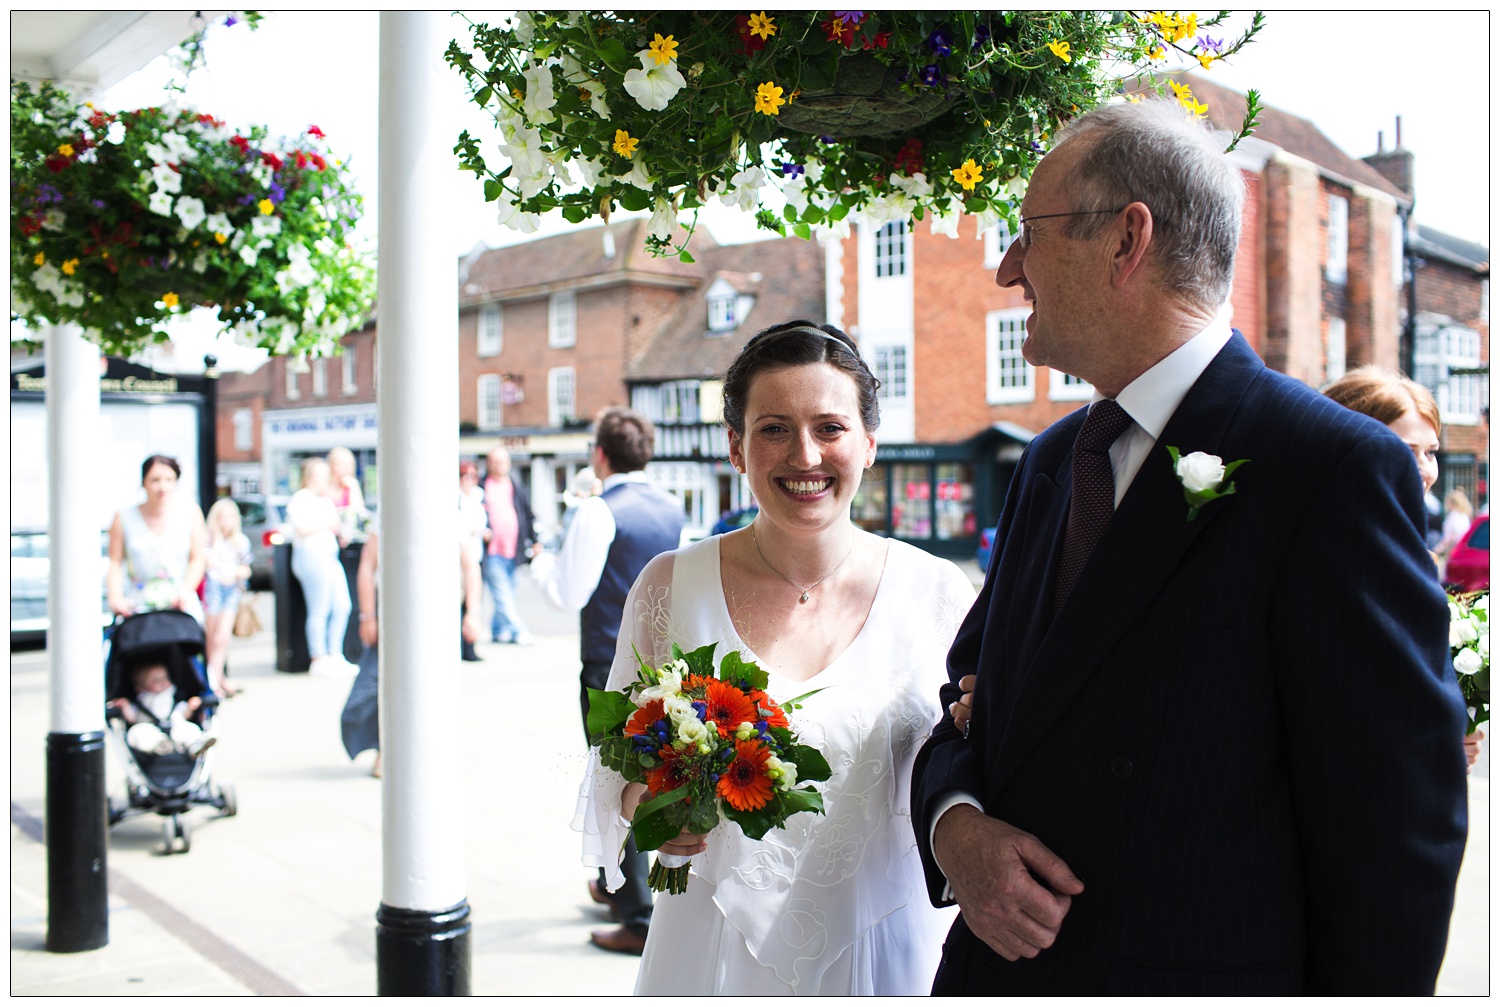 A woman in her wedding dress with her dad outside the town hall in the Tenterden. There are hanging baskets full of flowers.